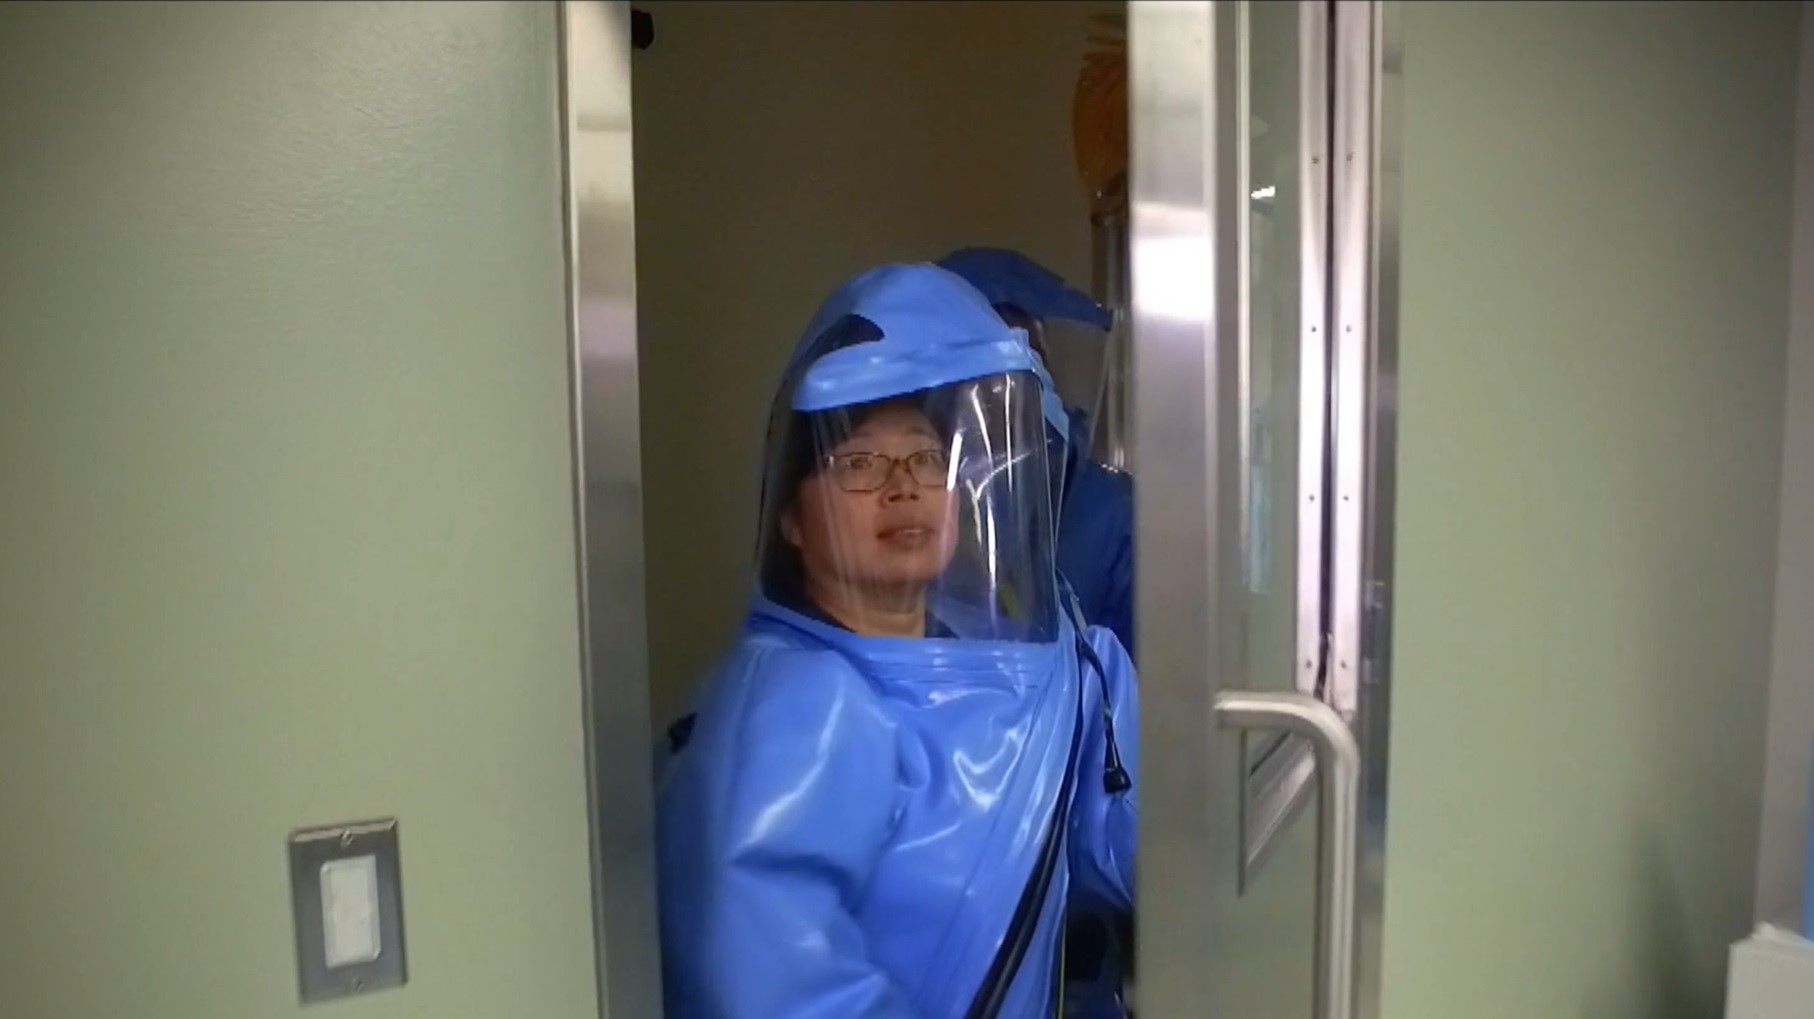 Qiu Xiangguo, seen in protective gear at Canada’s National Microbiology Laboratory, is at the centre of a controversy over alleged security breaches at the Winnipeg facility. Photo: Rideau Hall Foundation